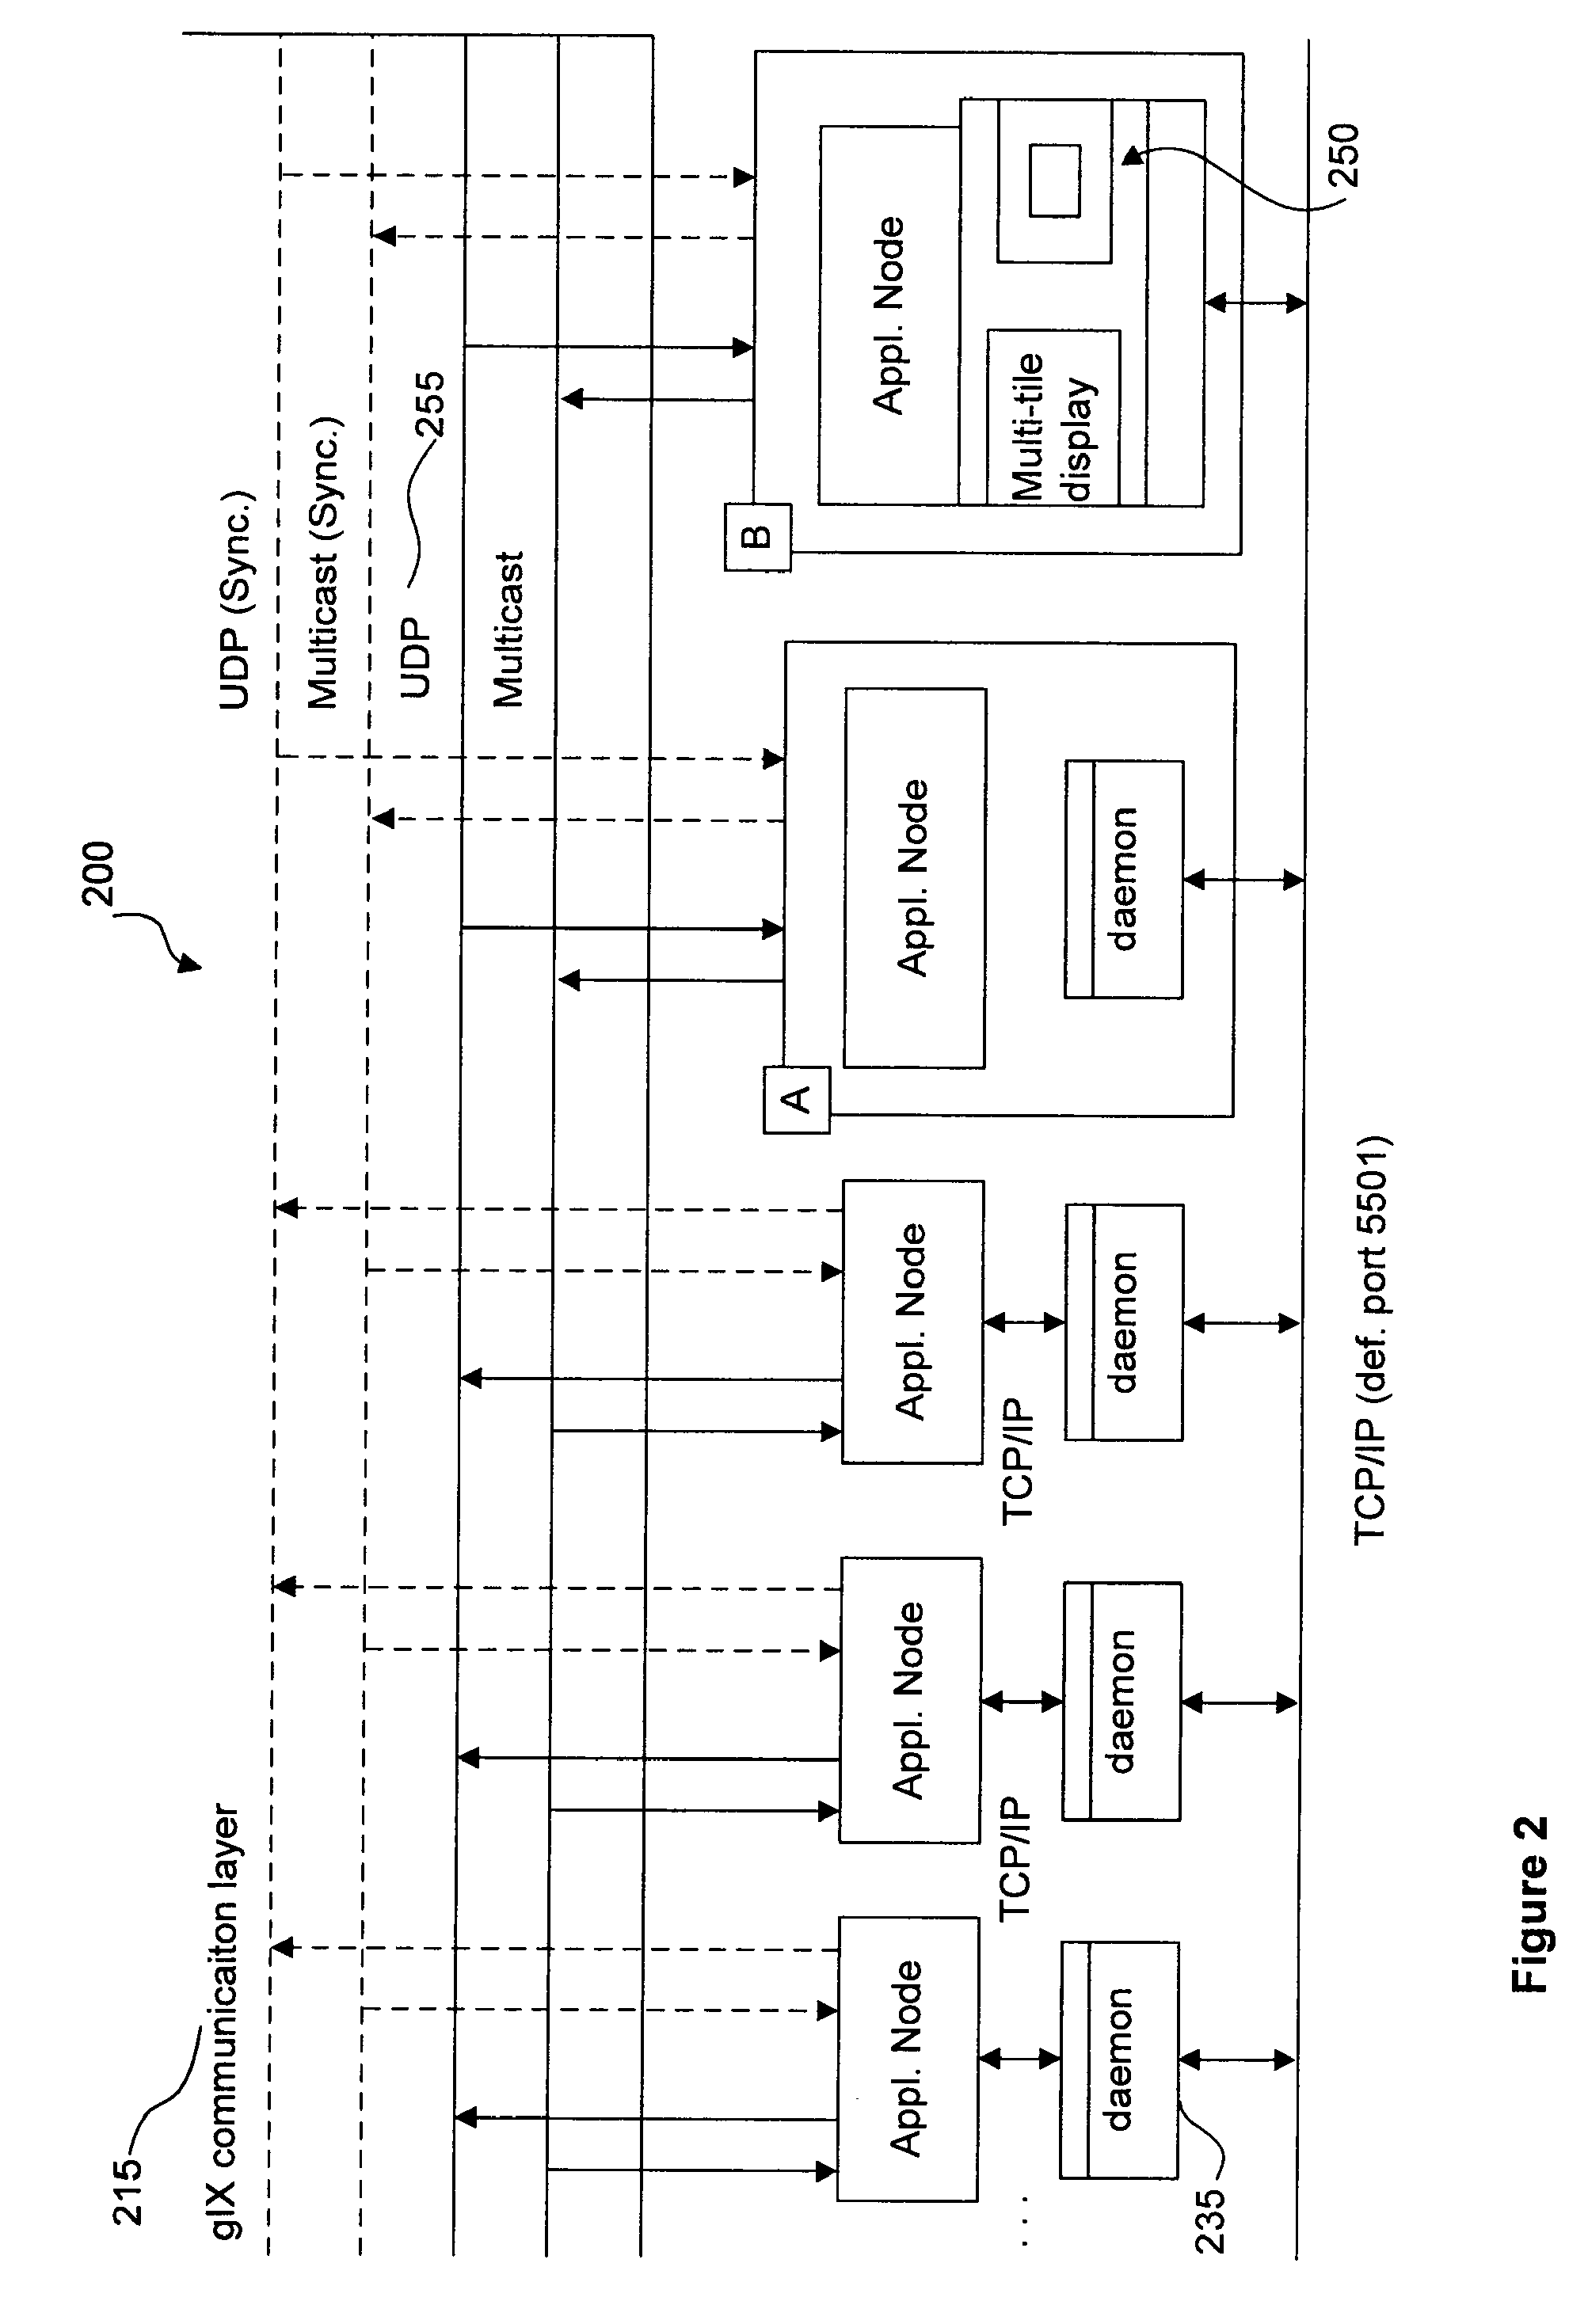 Scalable, Cross-Platform Method for Multi-Tile Display Systems